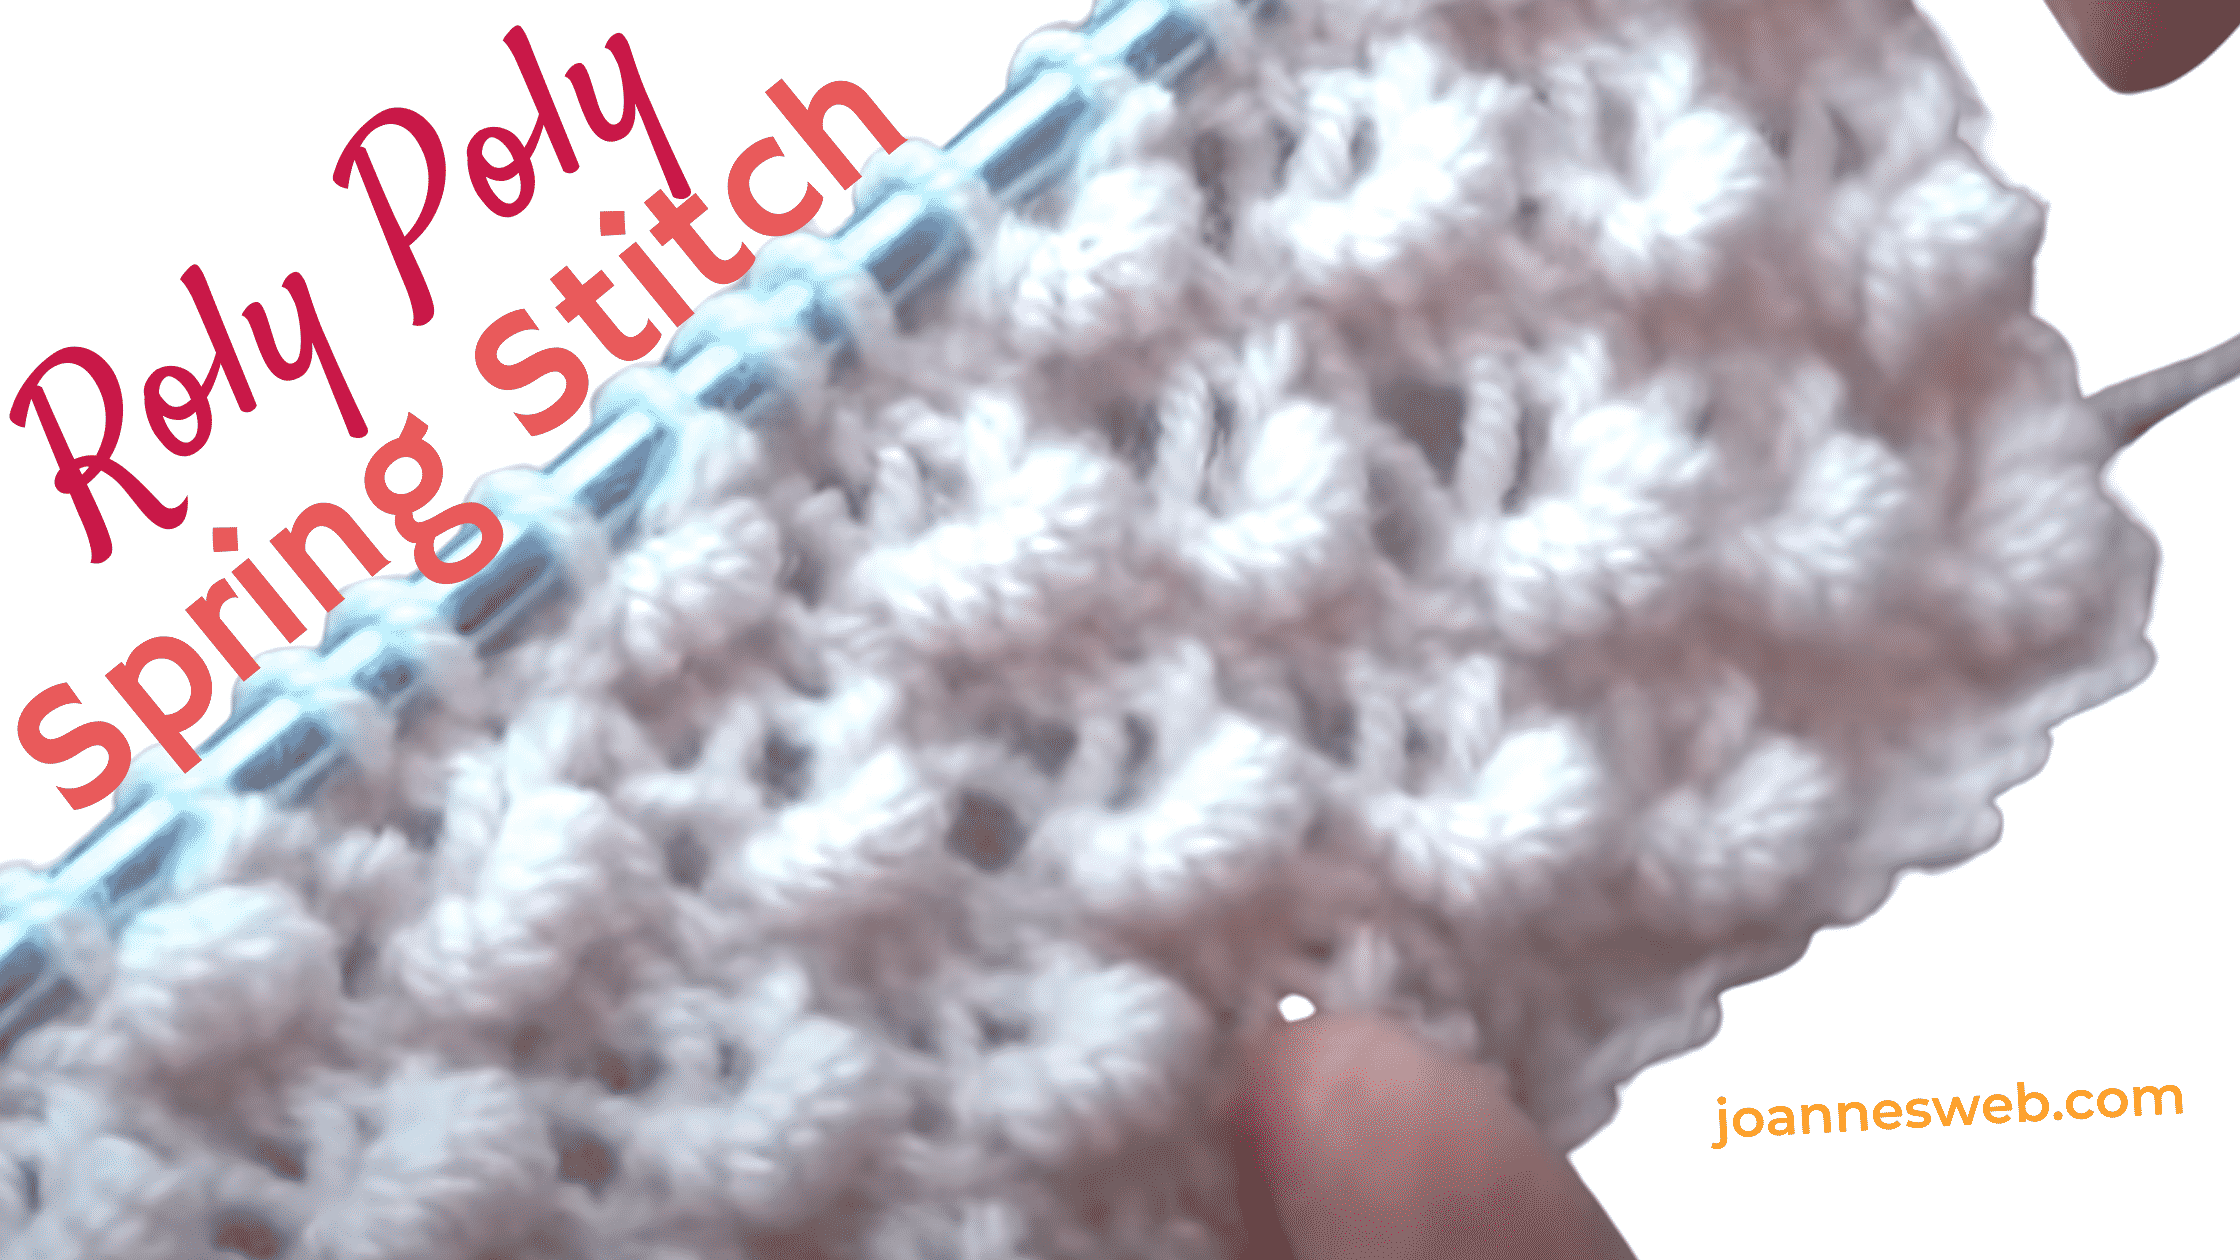 The Roly Poly or Spring Knitting Stitch Pattern